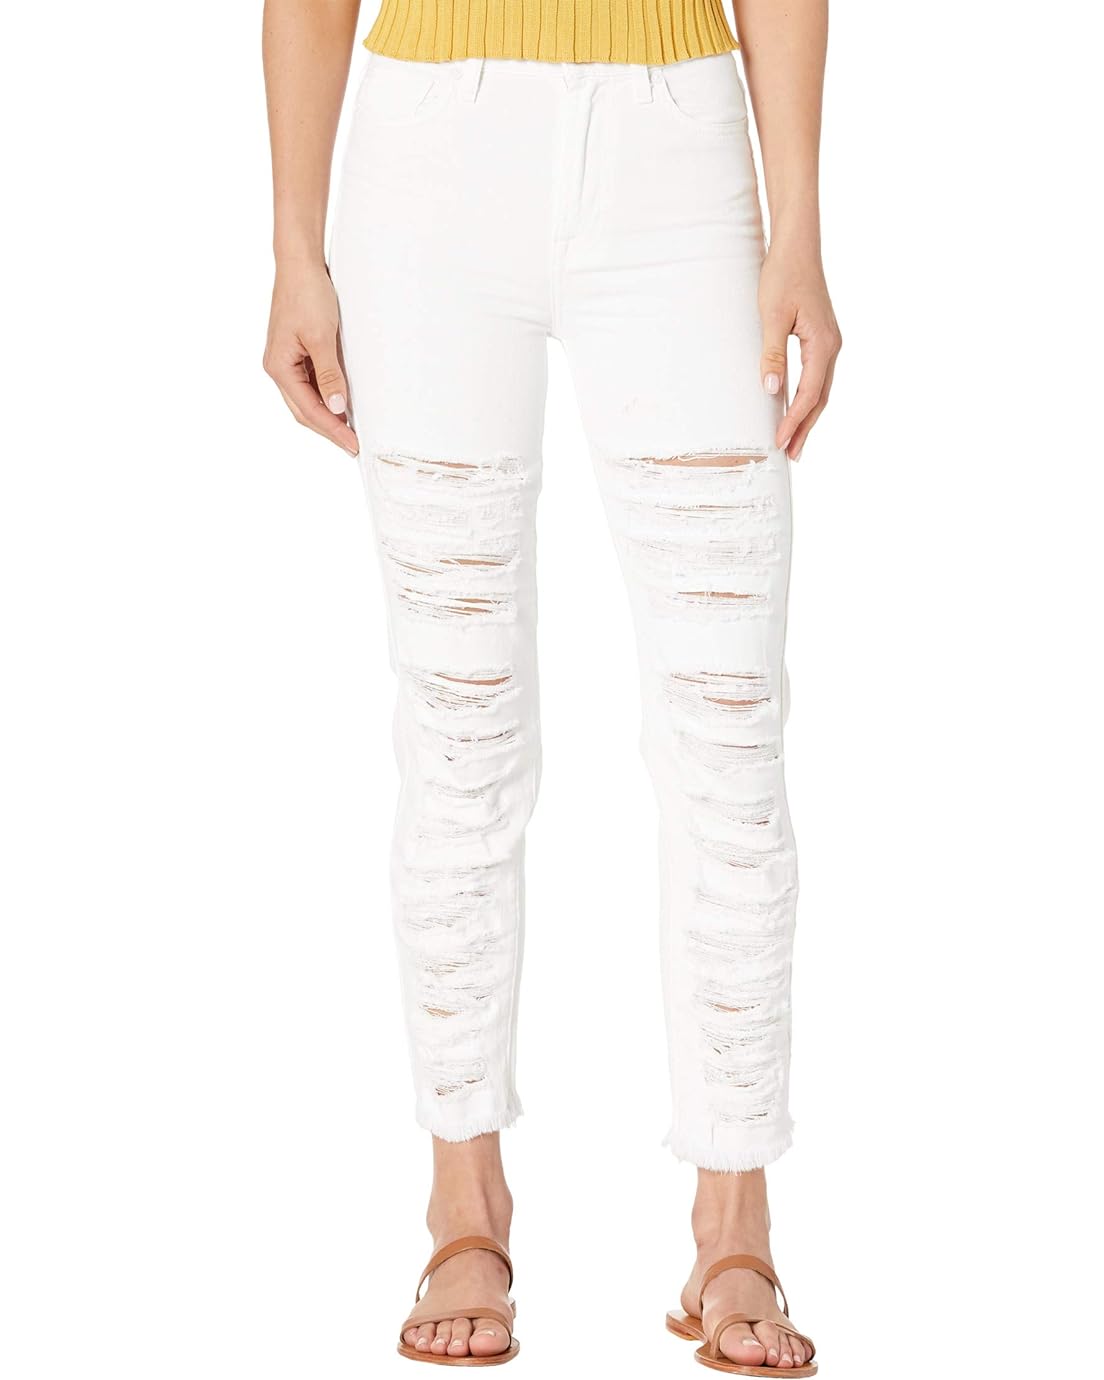 7 For All Mankind High-Waist Cropped Straight in Prince St. Shredded